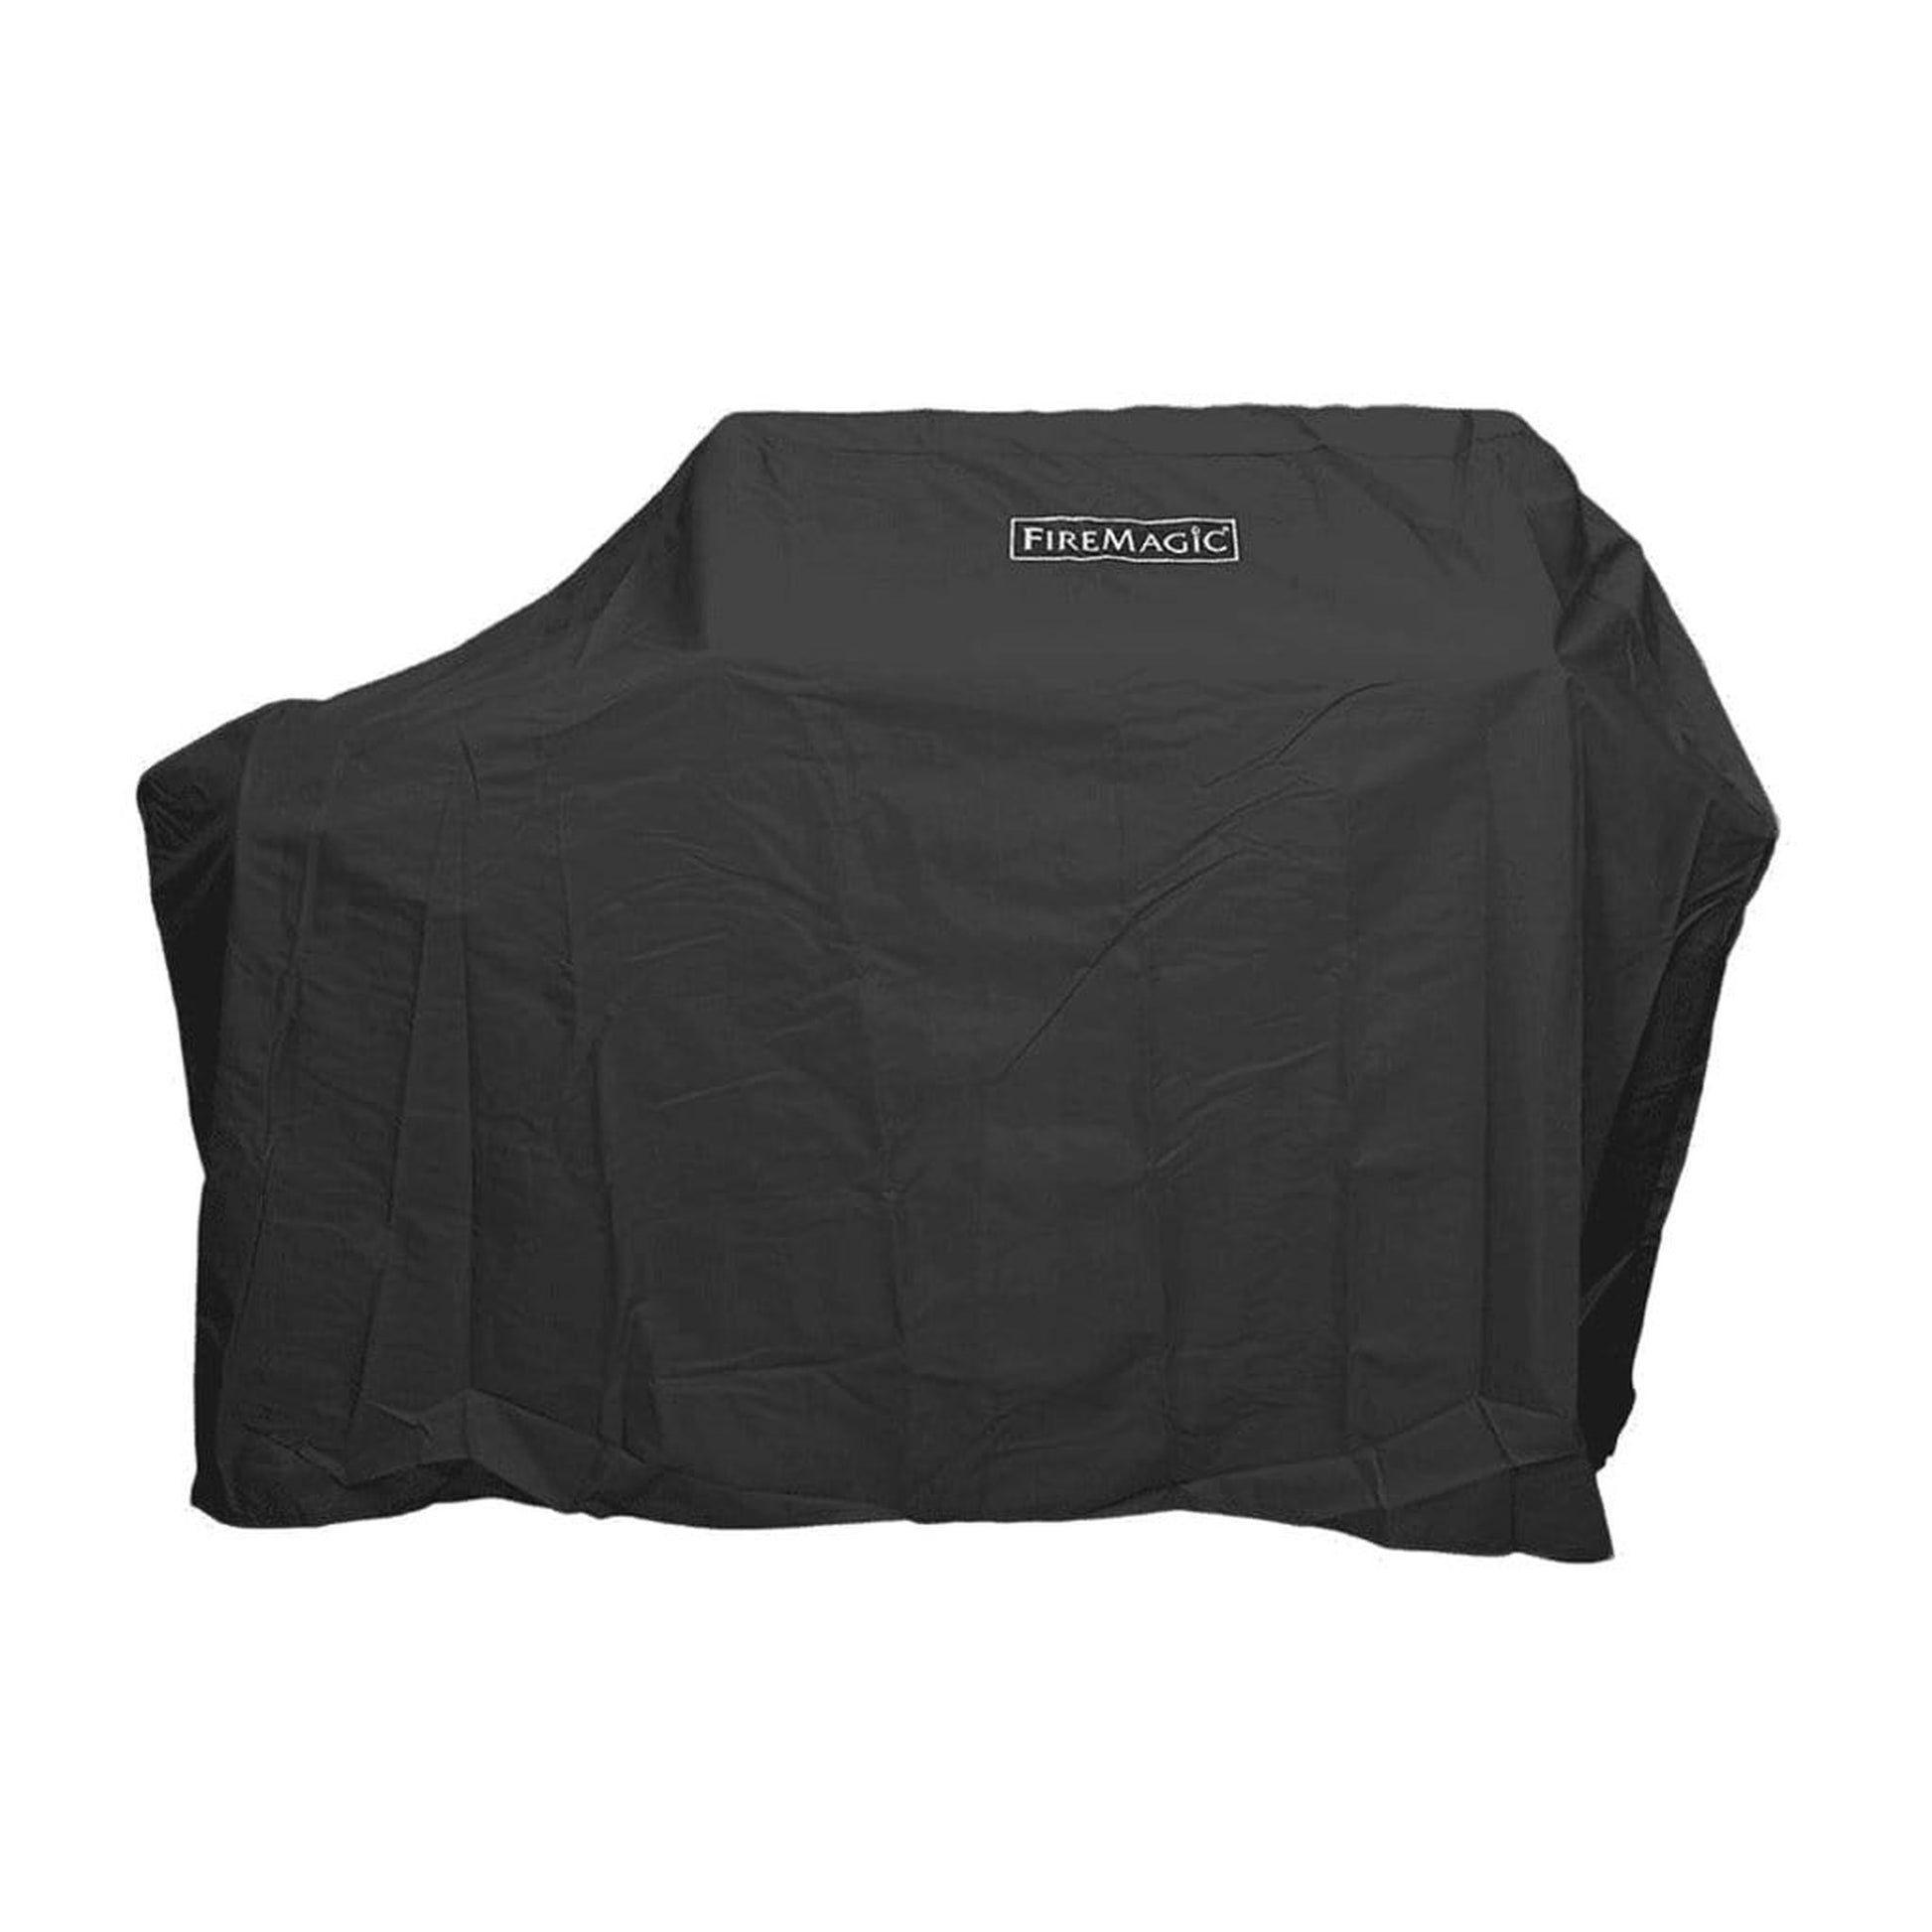 Fire Magic 5192-20F Black Vinyl Cover for Aurora A830s Gas/Charcoal Combo Grills